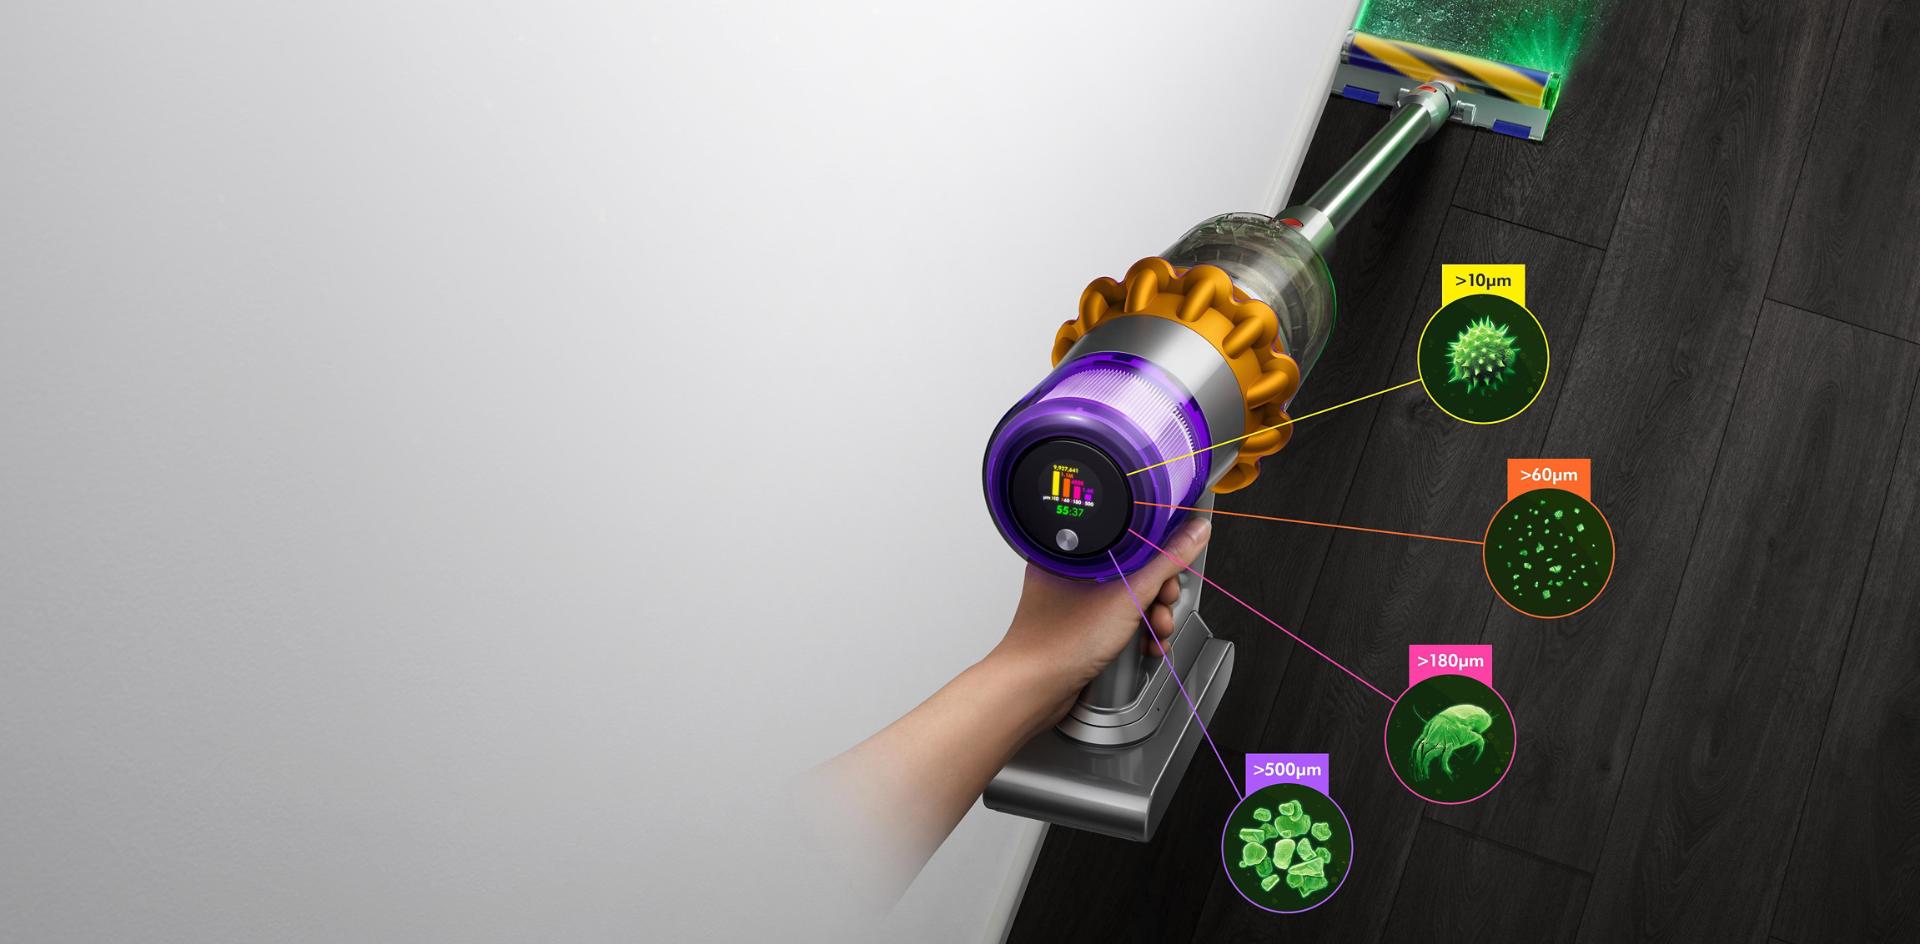 Dyson V15 Detect vacuum with Laser Slim Fluffy cleaner head, showing sizes of dust detected